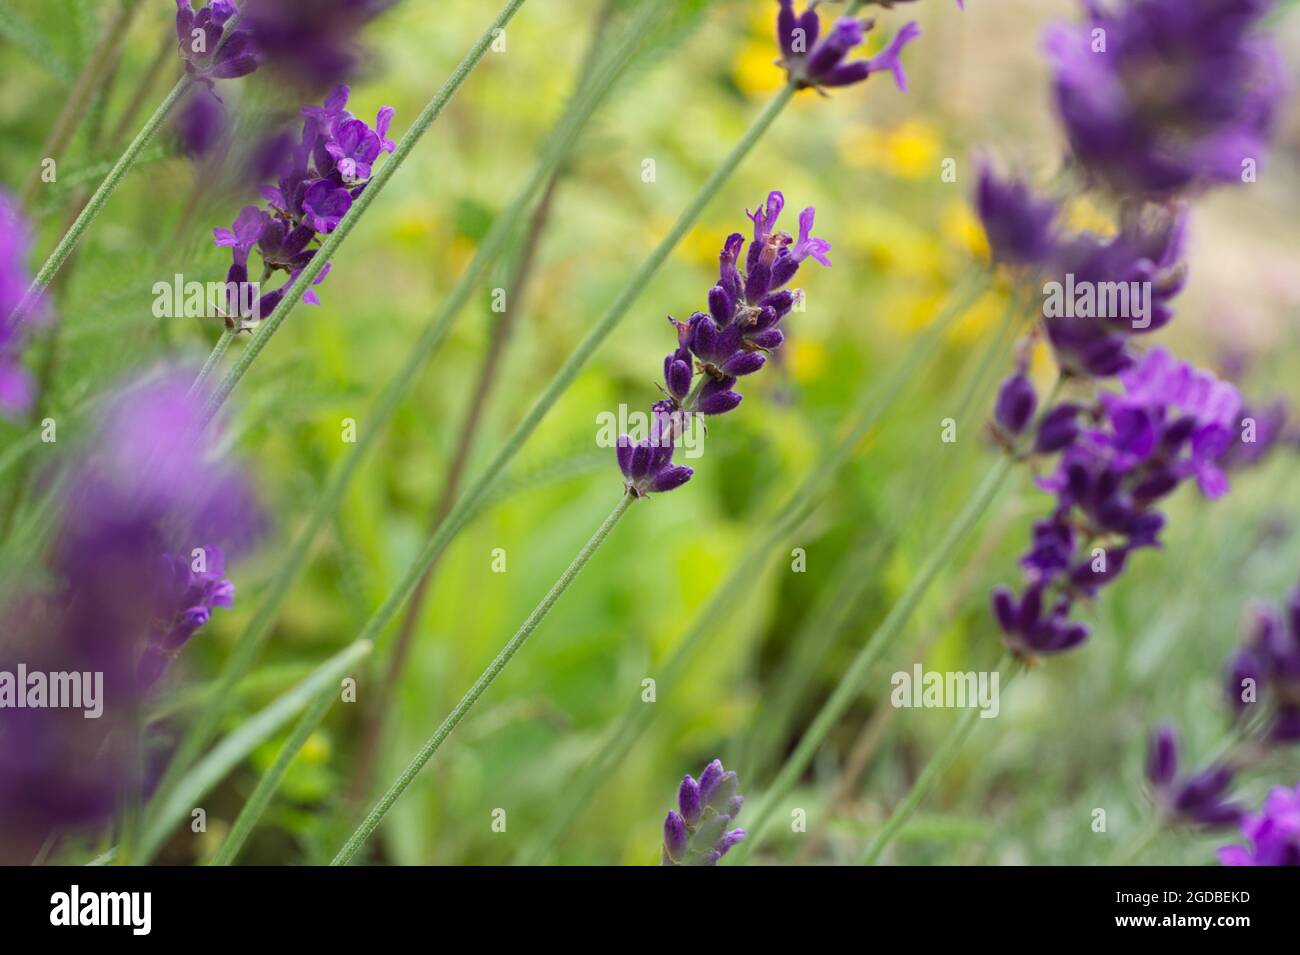 Lavandula augustifolia Hidcote, English lavender plants close up and with selective focus Stock Photo